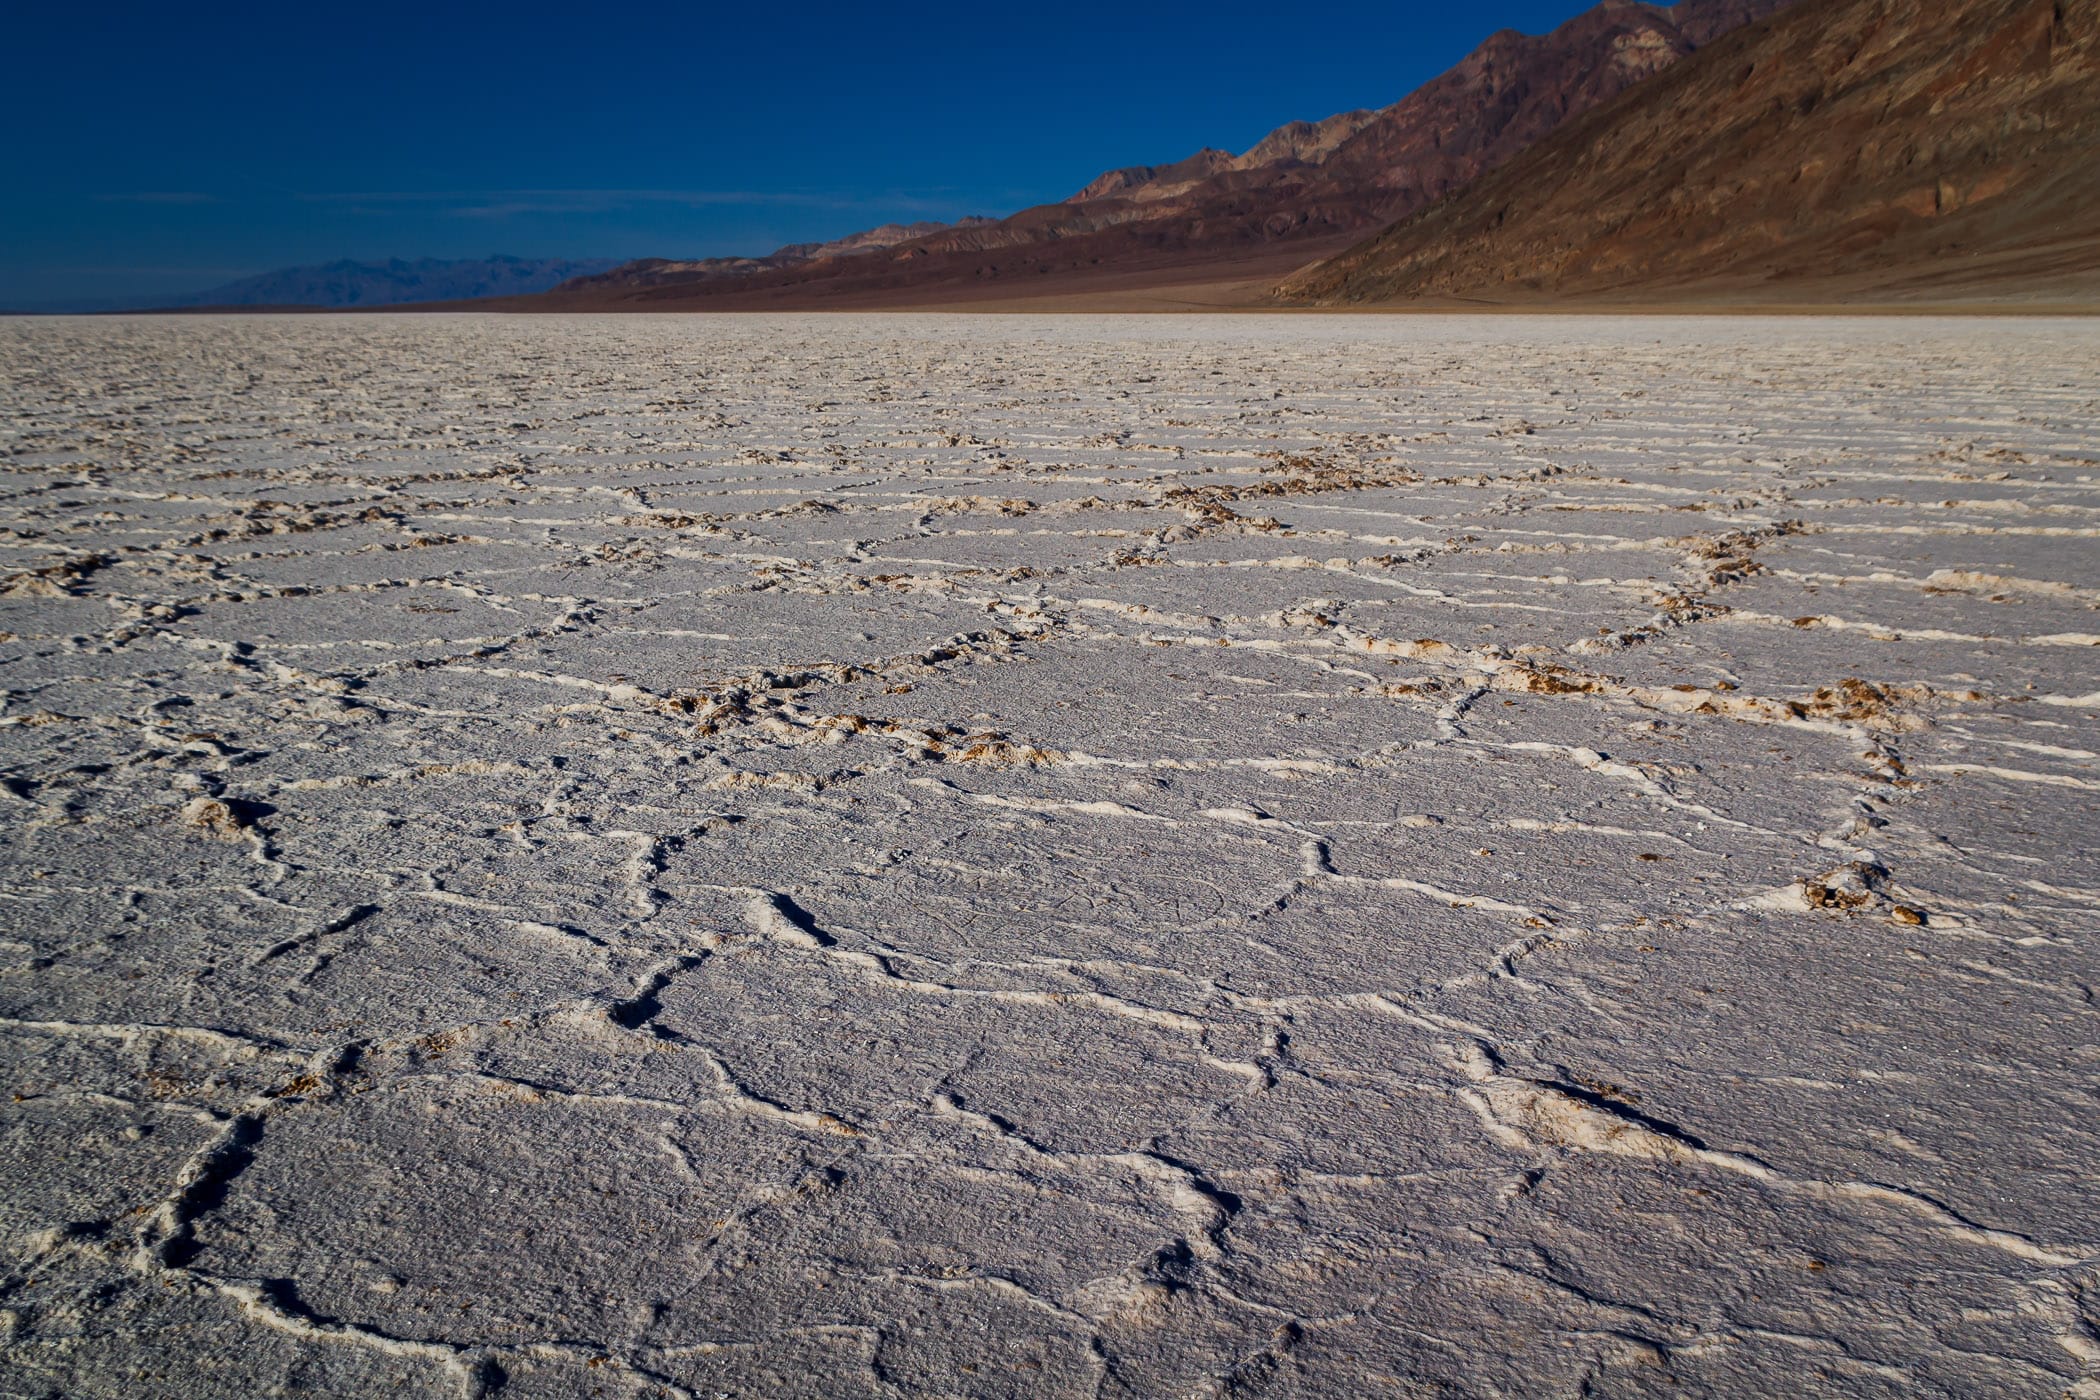 The salt flats of Badwater Basin—the lowest point in the United States—at Death Valley National Park, California.